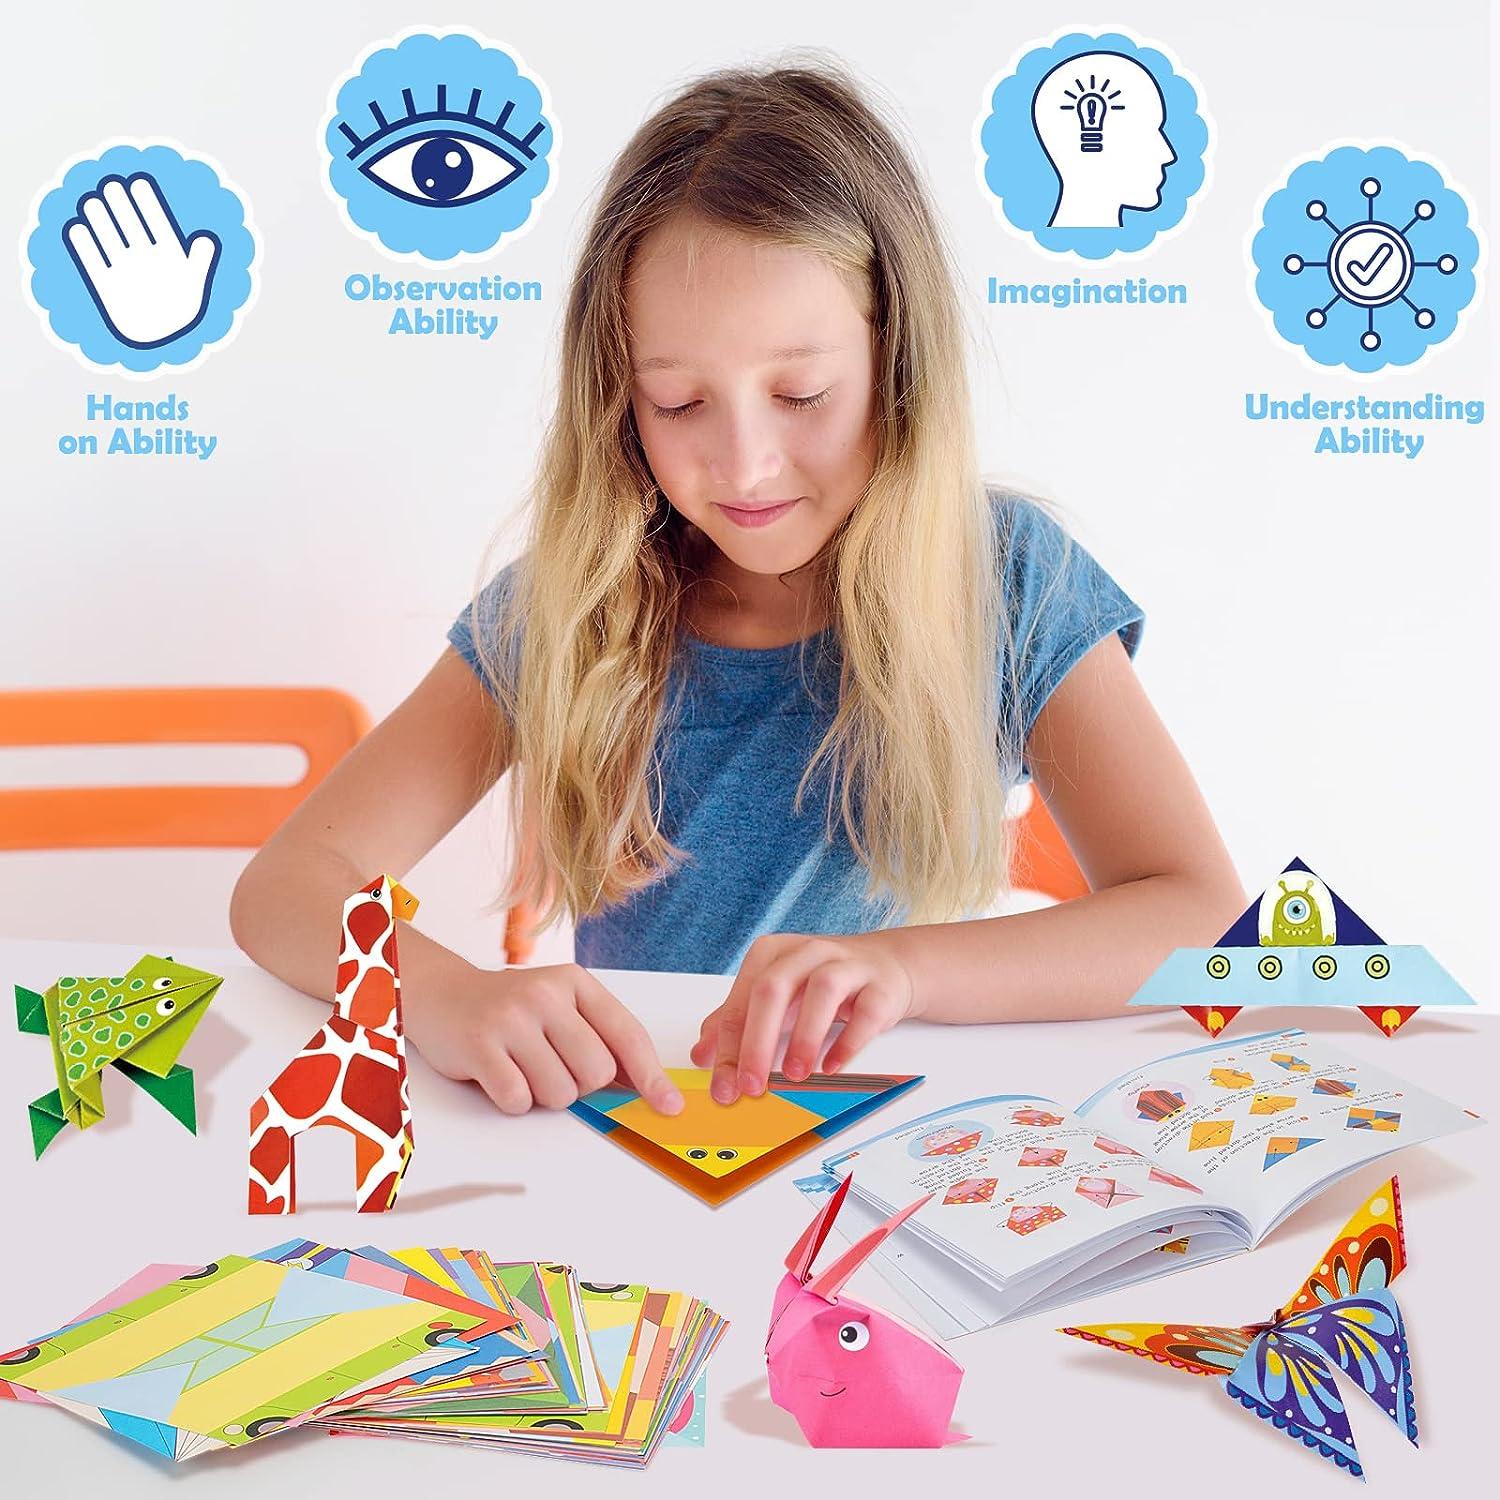 Color Origami Paper for Kids, Origami Kit, 108 Sheets - Toys for